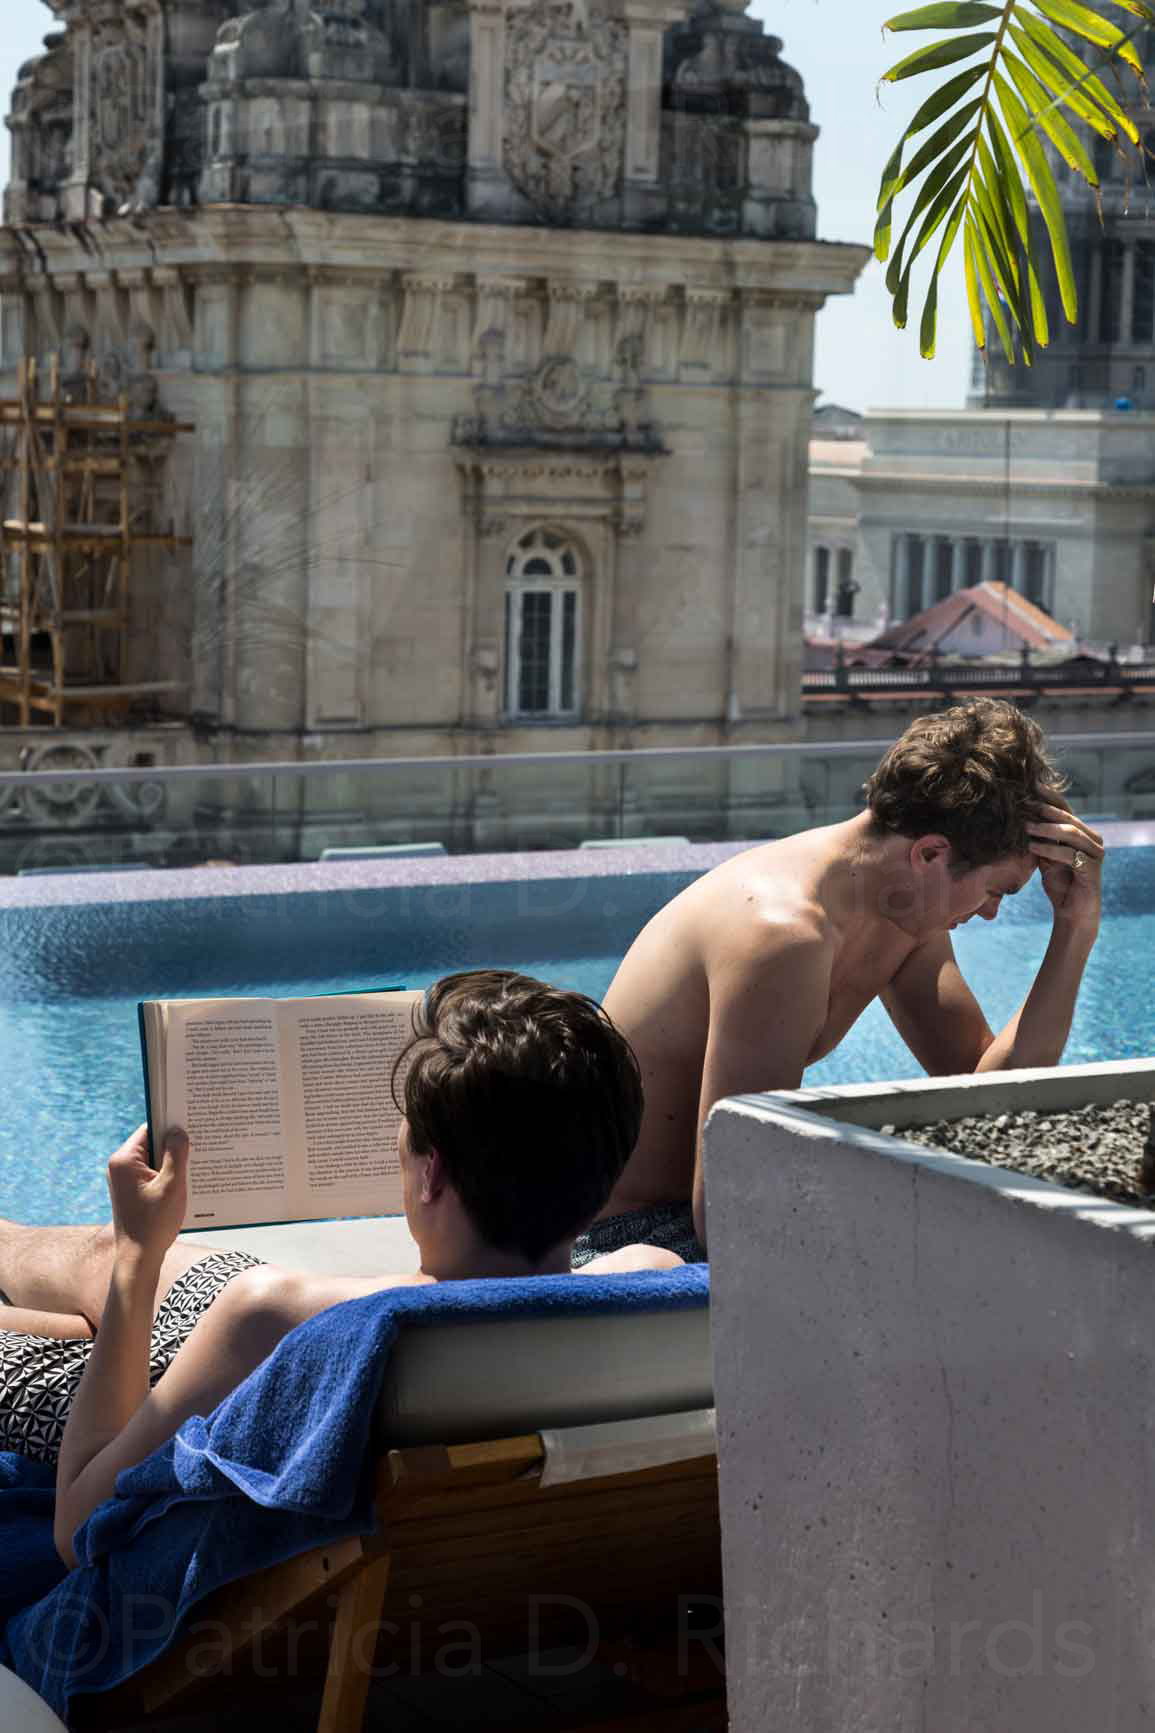 reading by the pool